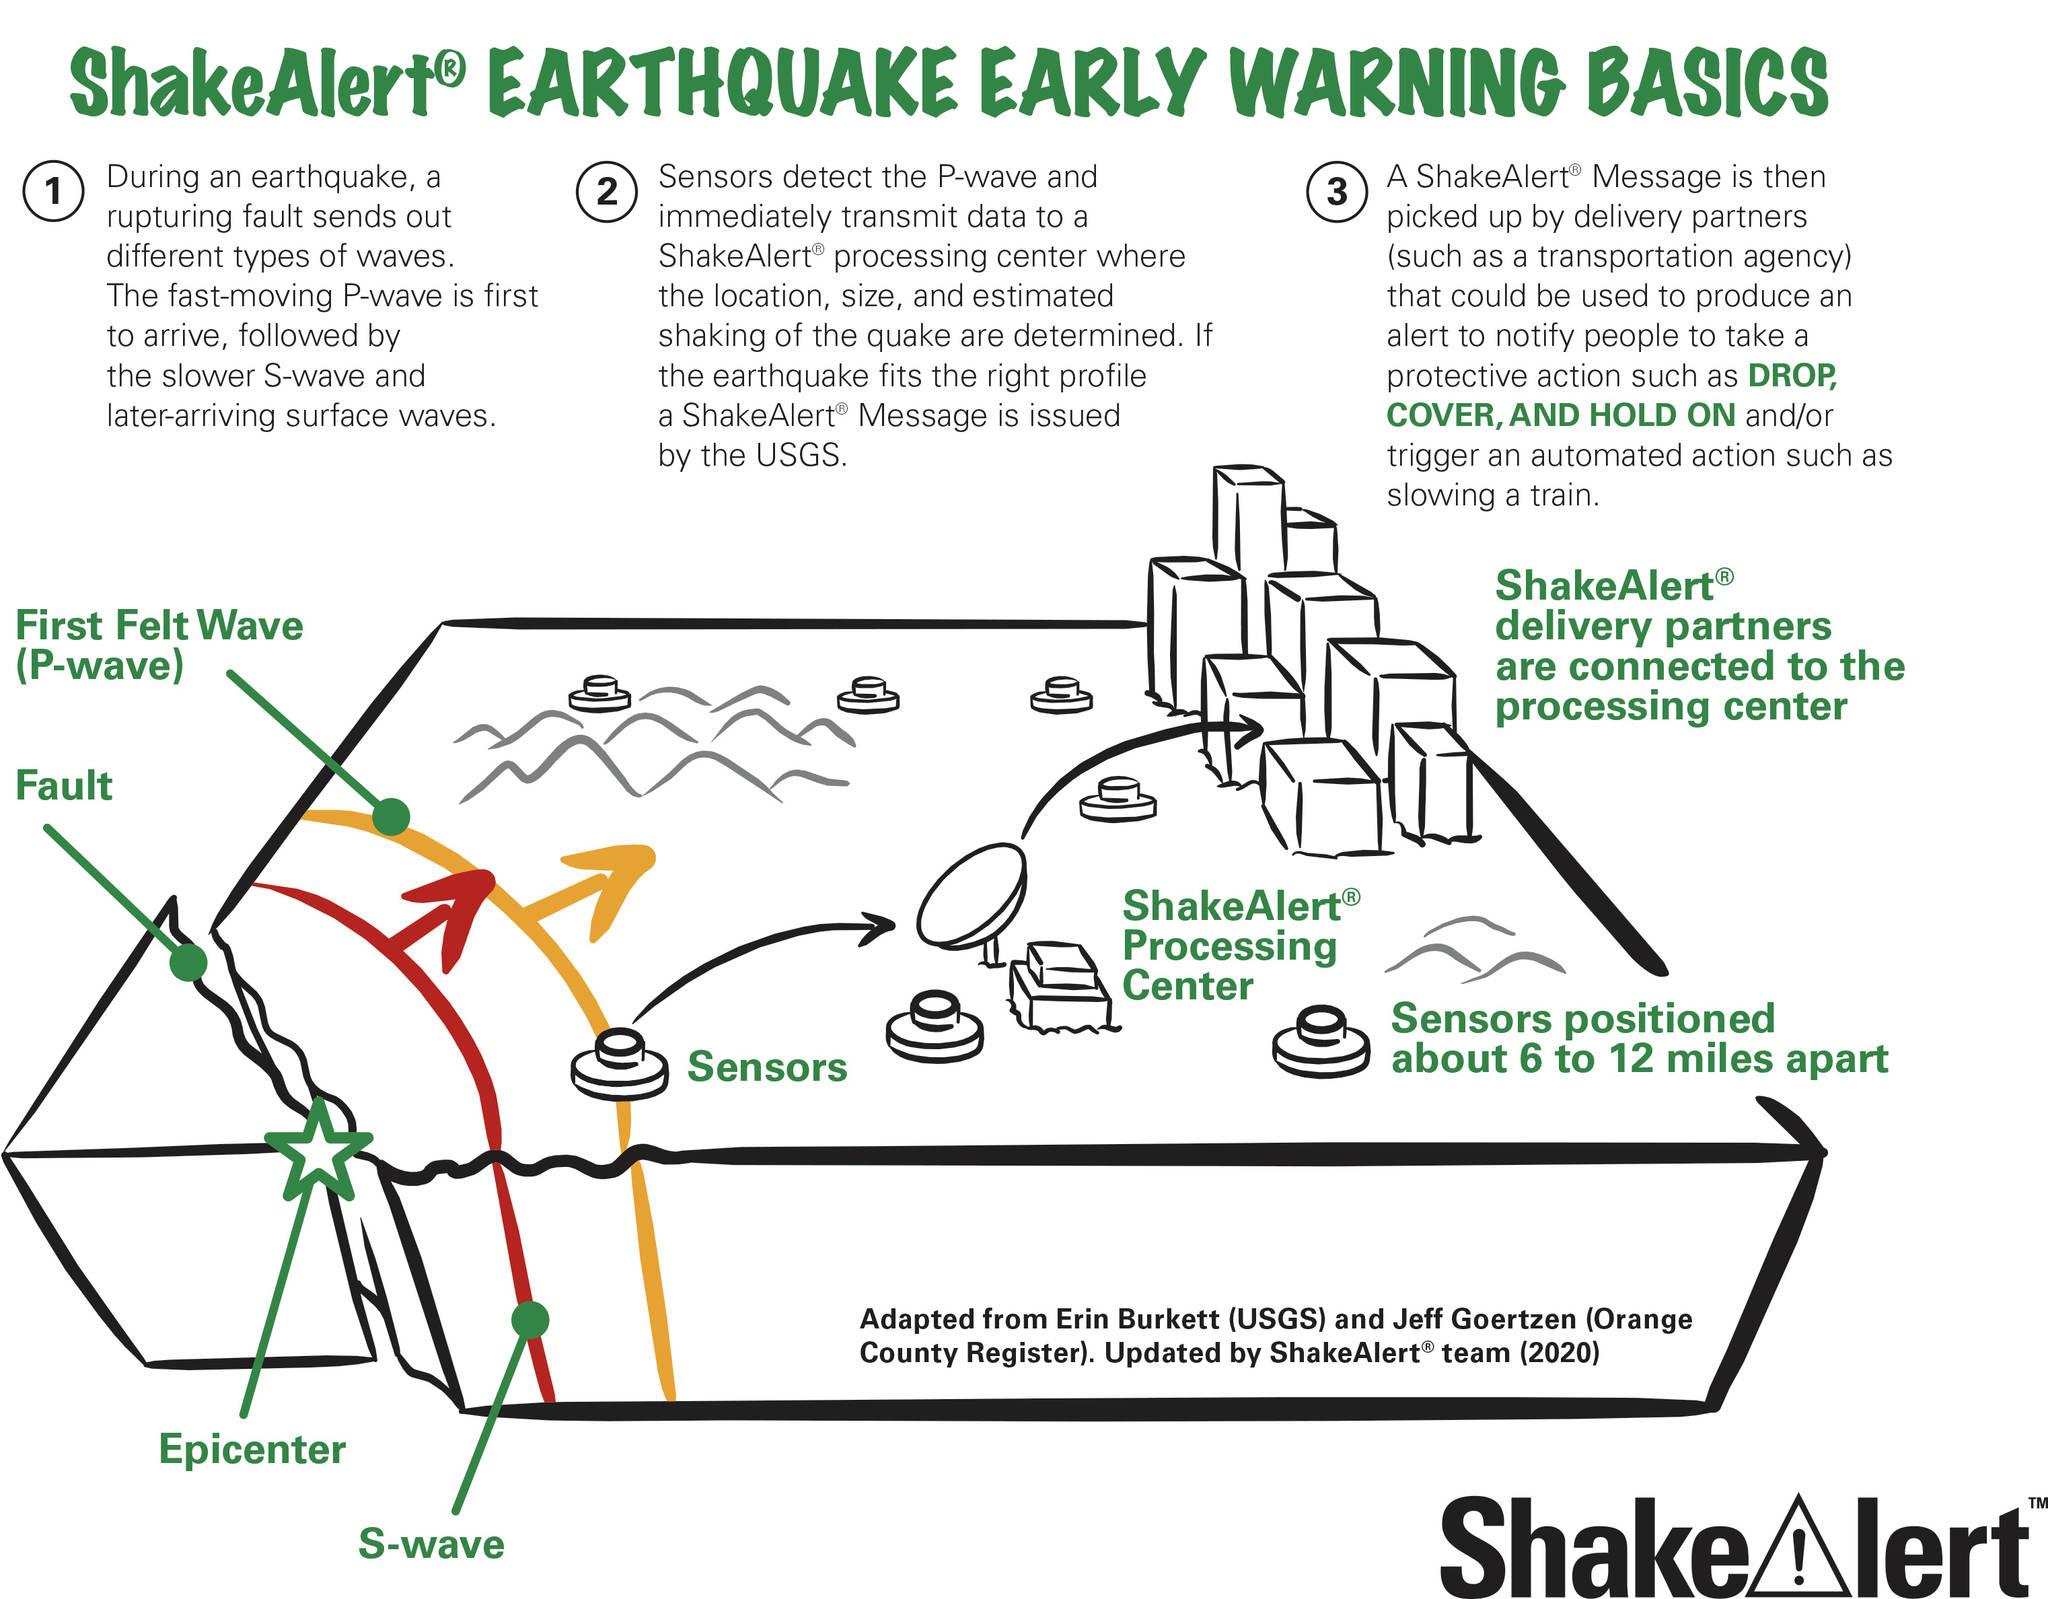 Early Warning Basics infographic provided by the WA EMD and ShakeAlert® Earthquake Early Warning system.